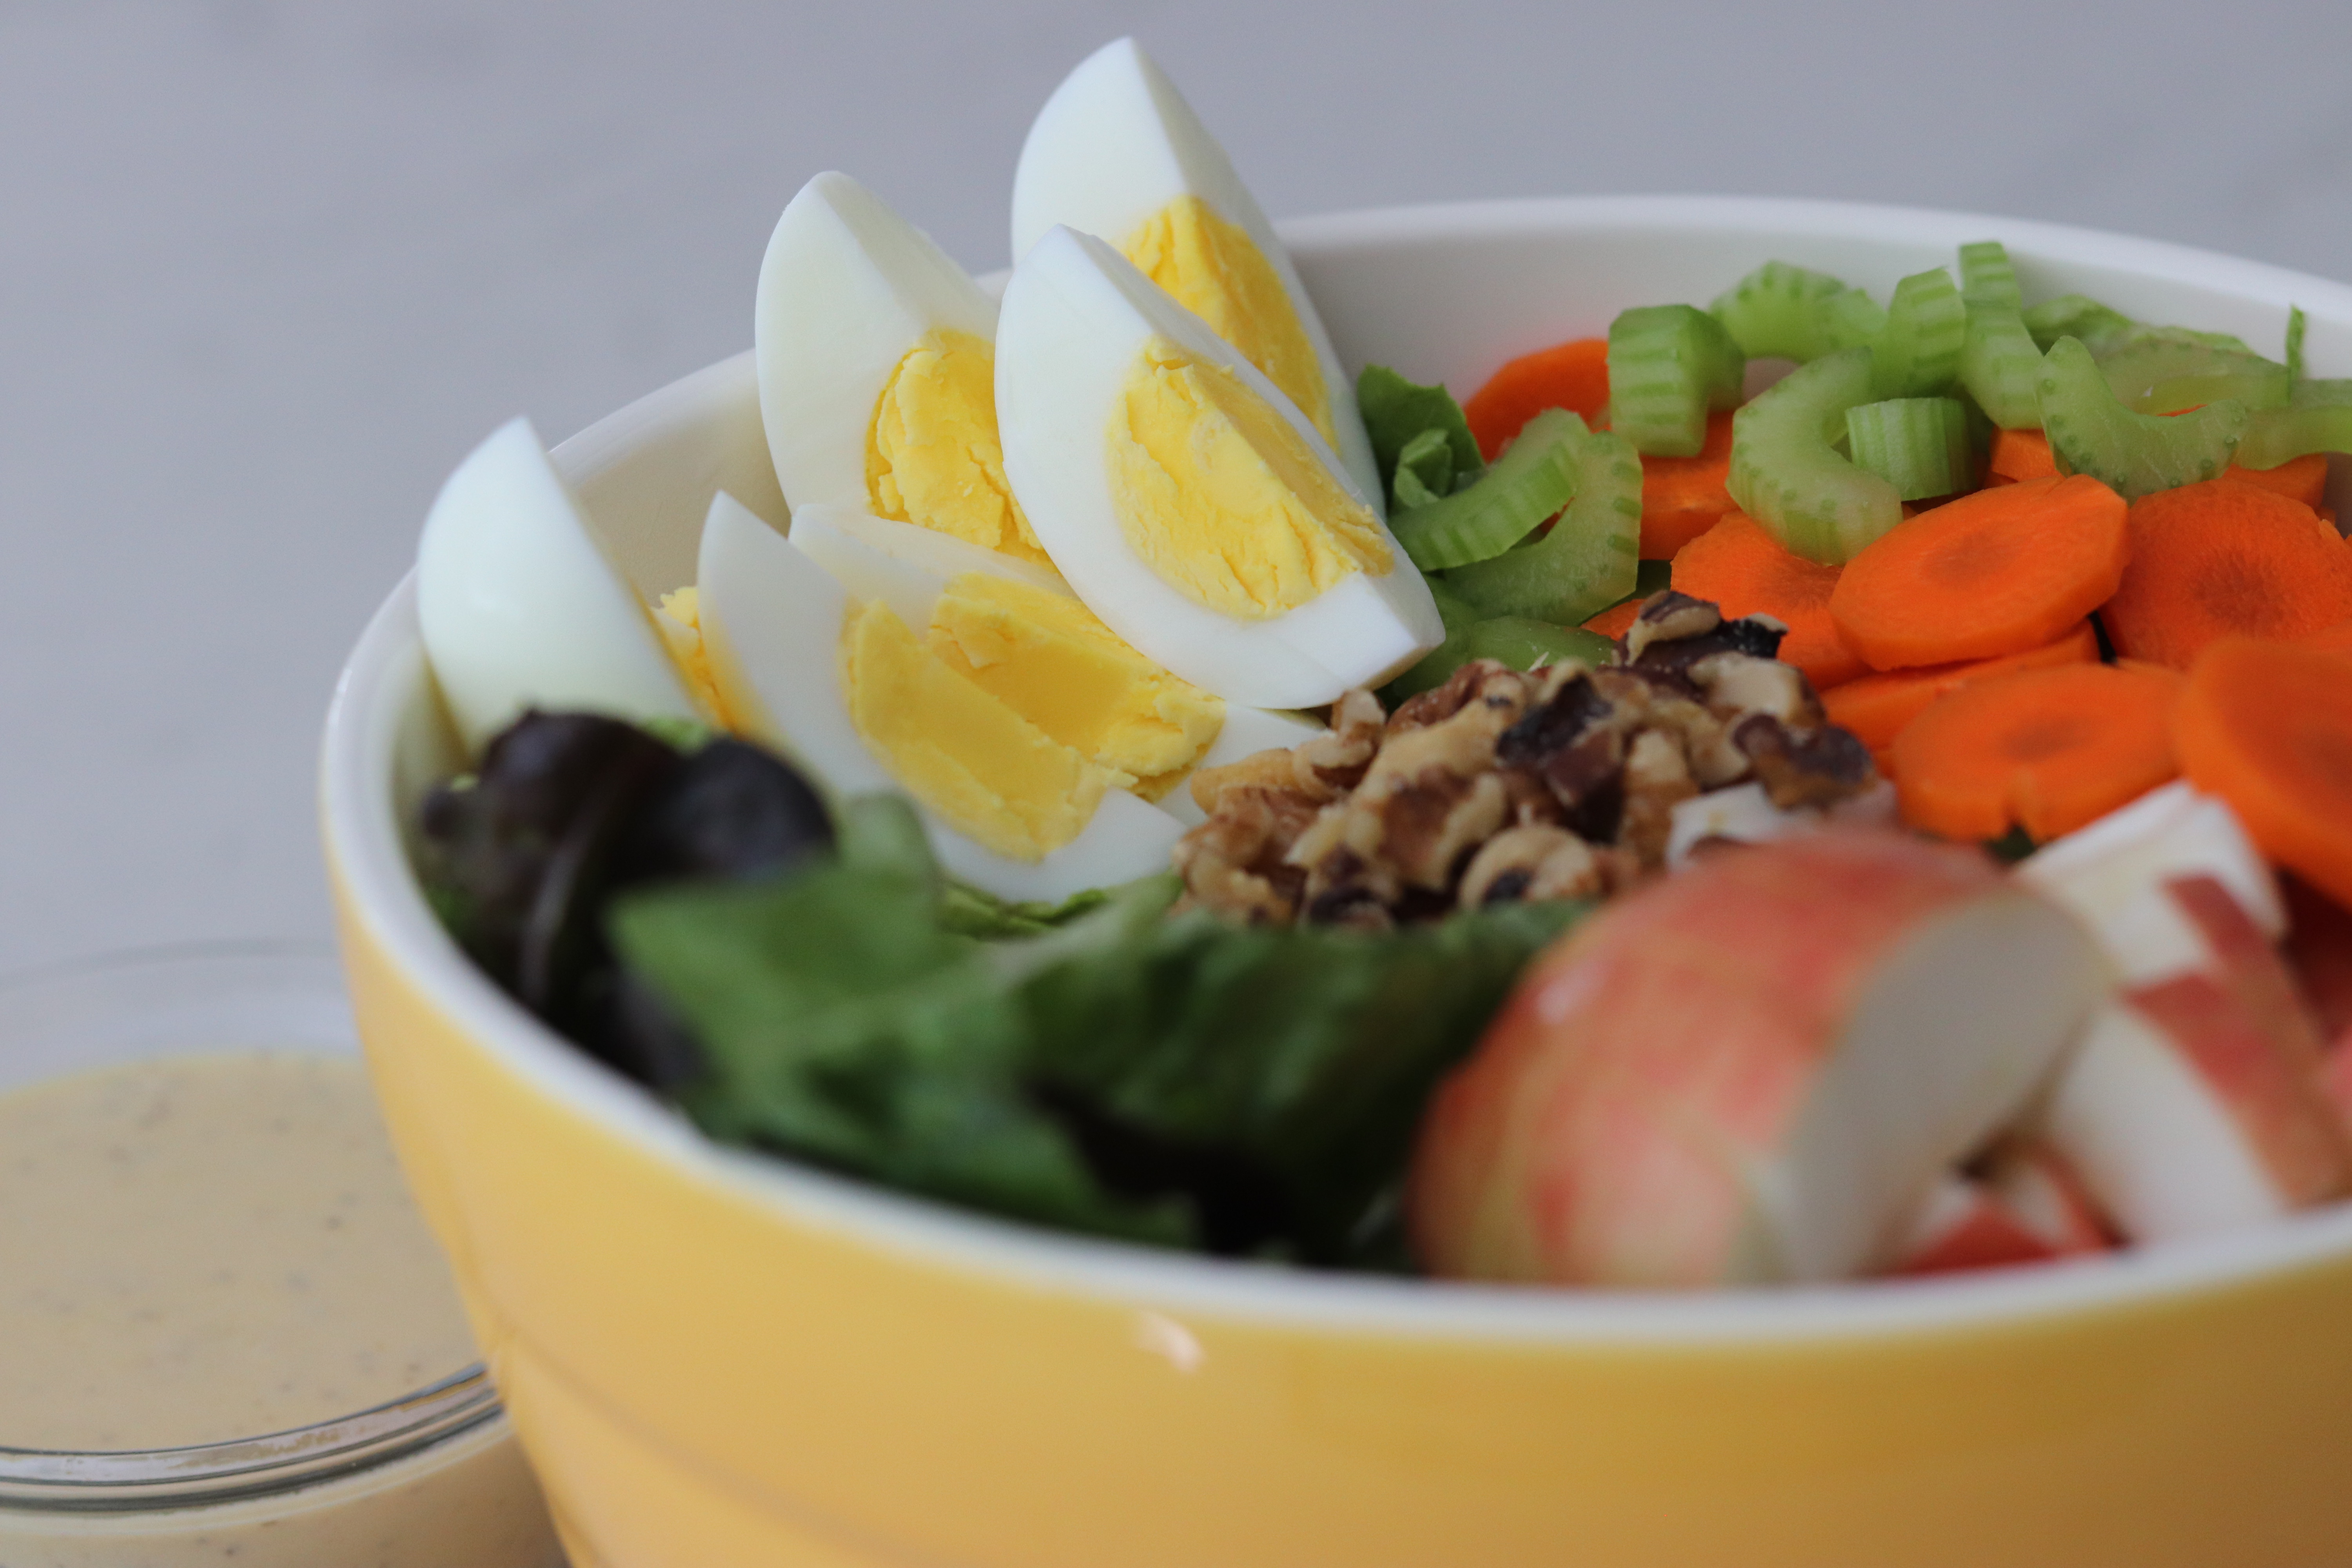 Fall Salad with Boiled Eggs and a bowl of Honey Mustard Dressing